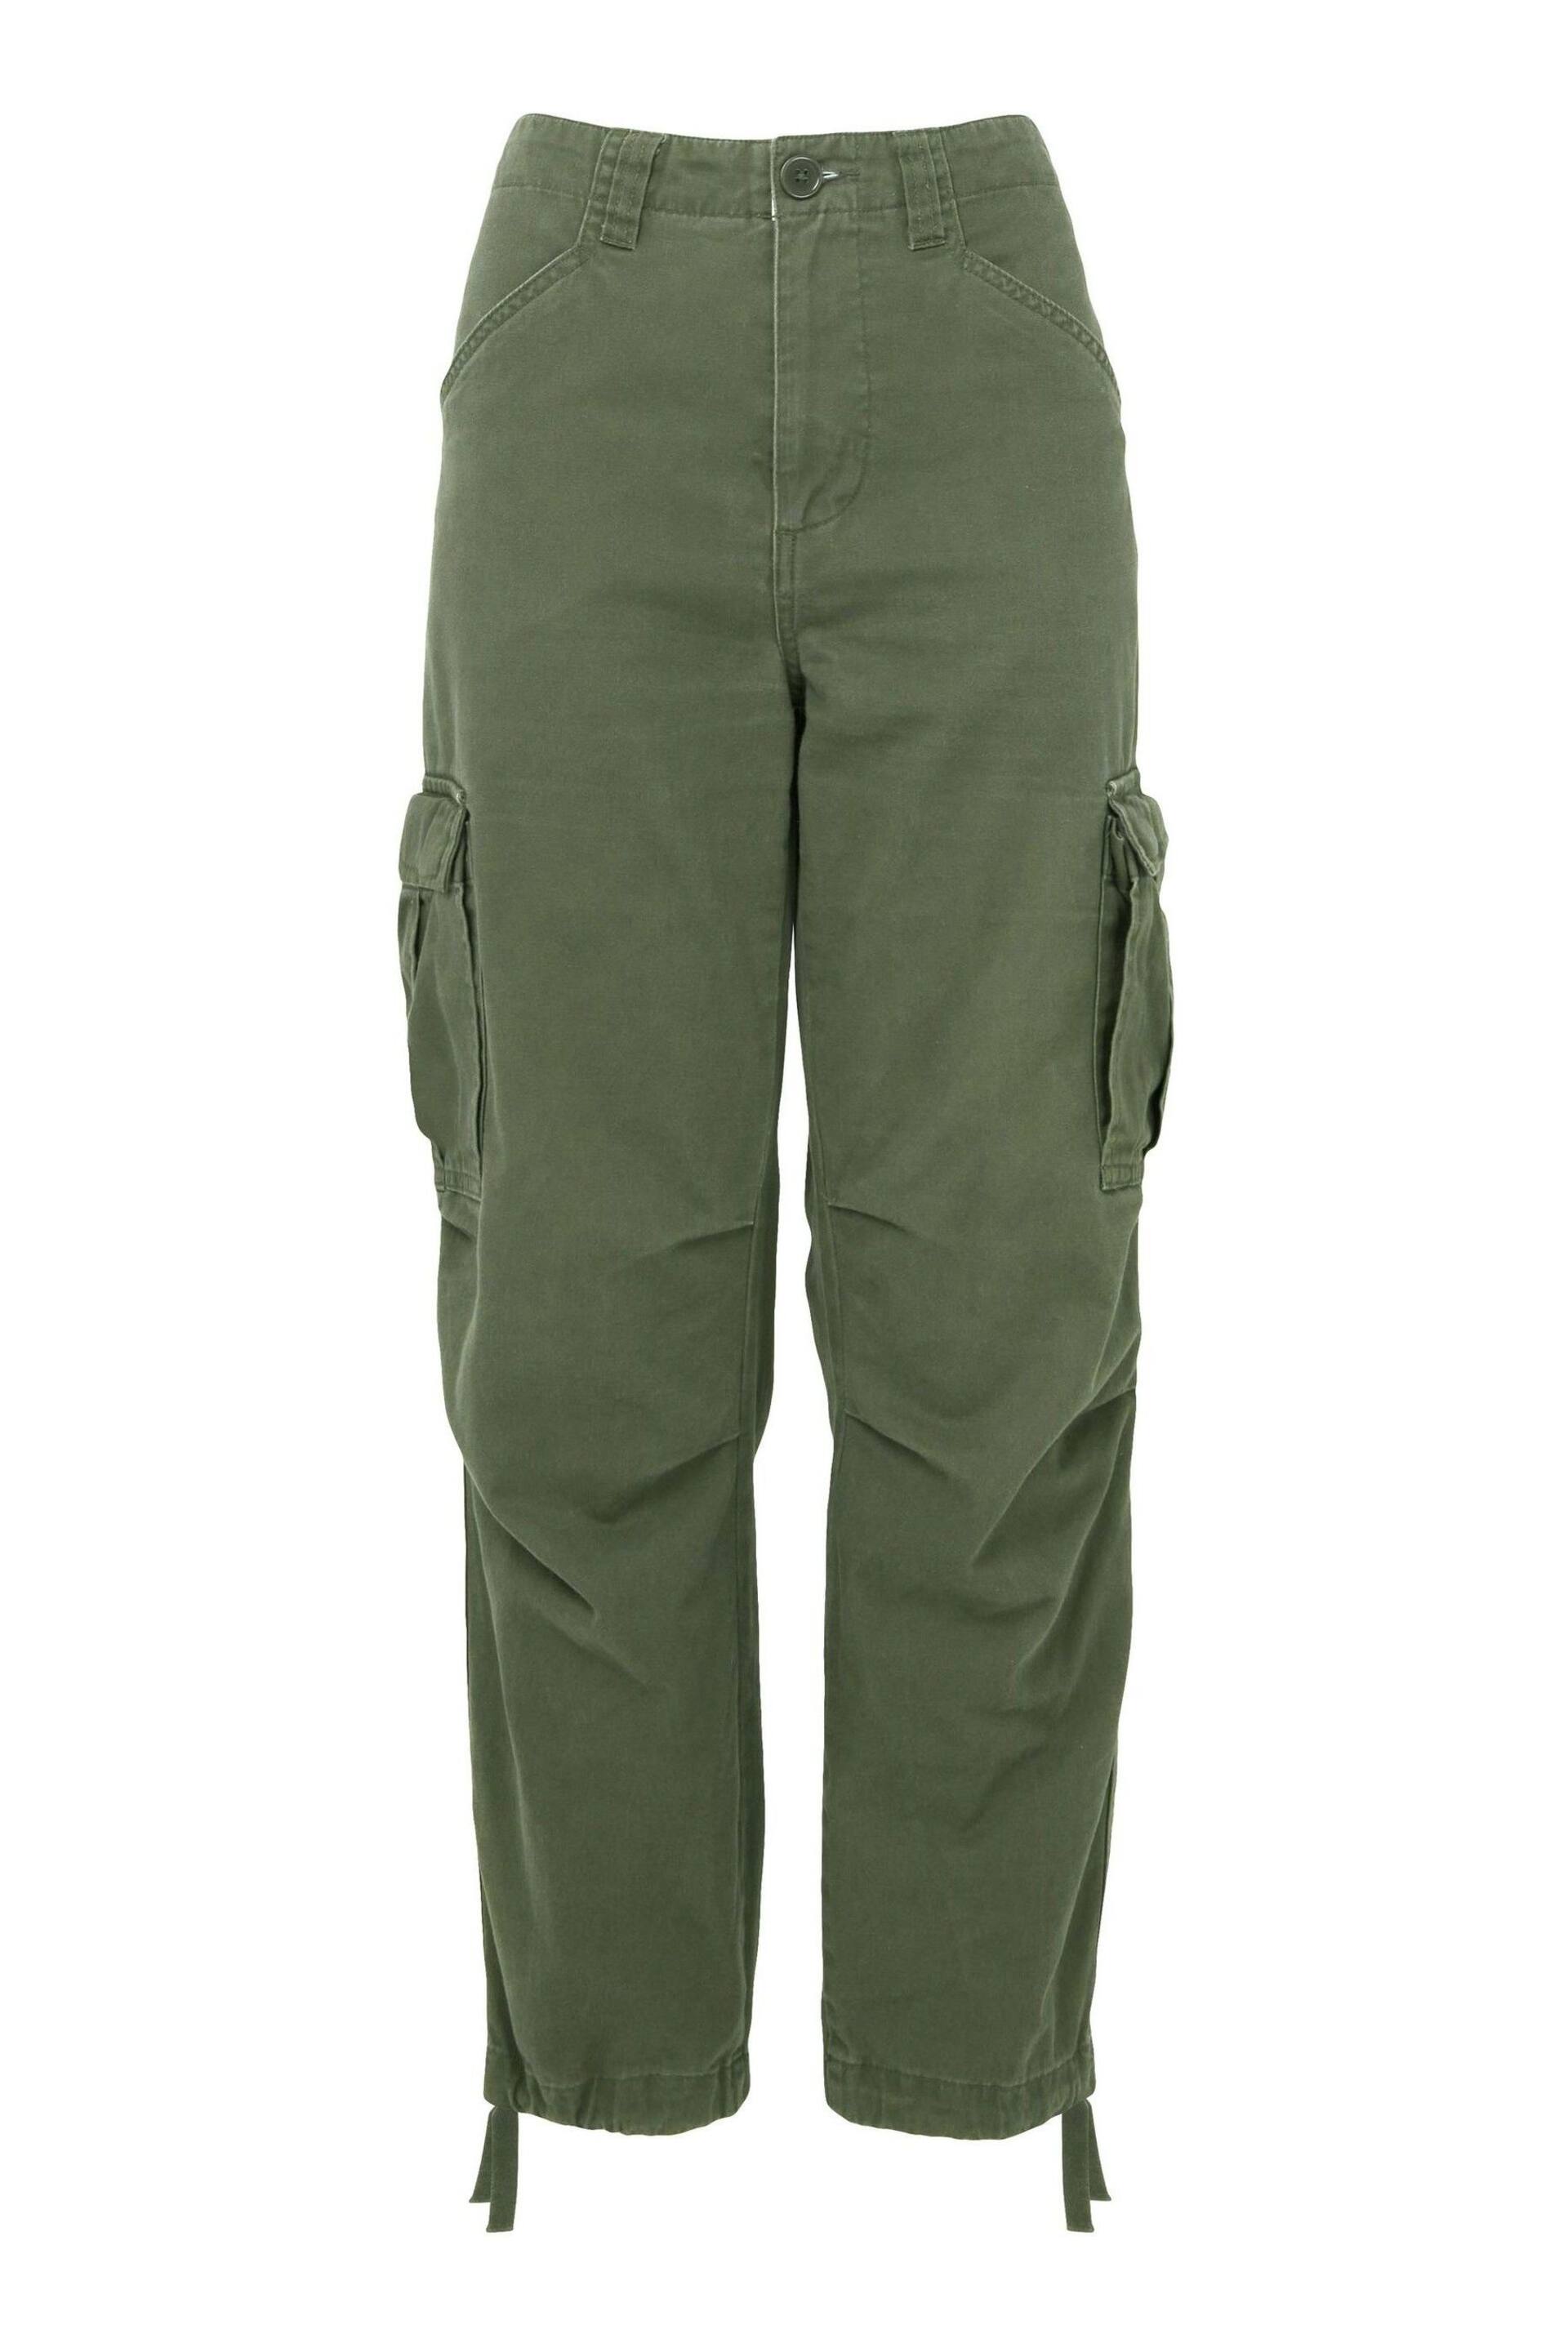 Joe Browns Green Relaxed Fit Cargo Joggers - Image 5 of 5